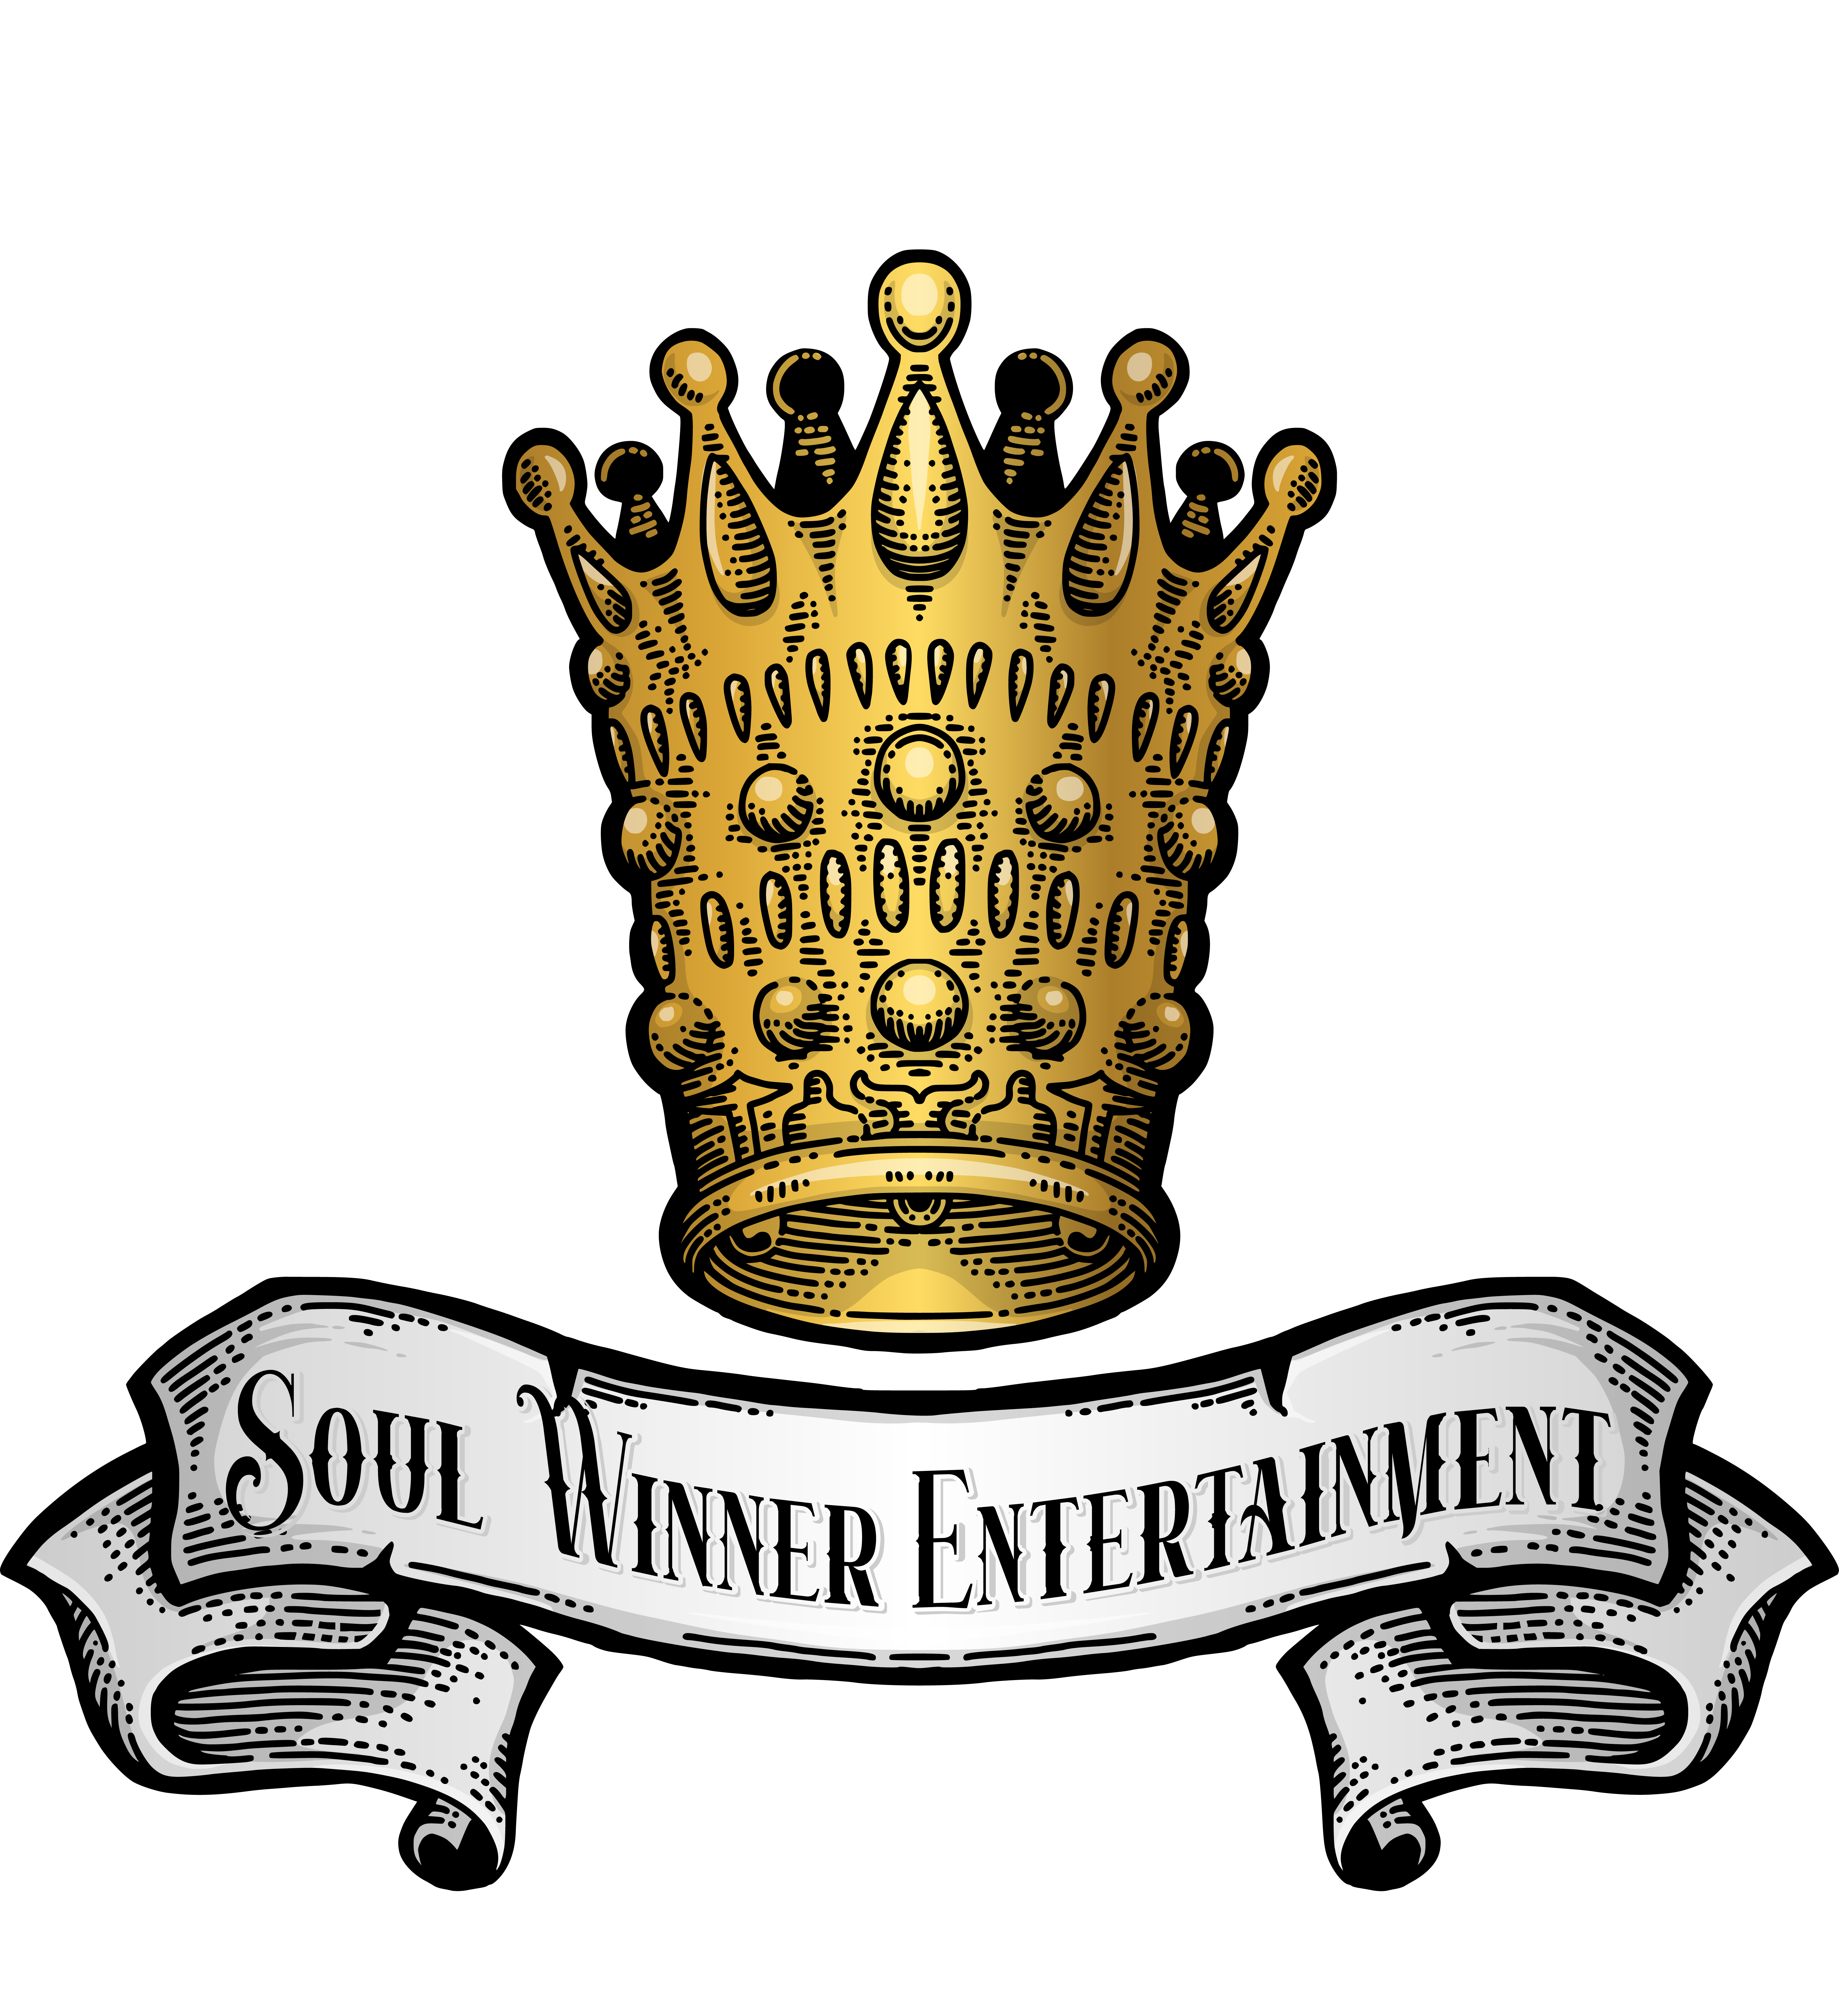 "Shining Golden Crown with Beams of Light and 'Soul Winner Entertainment' Banner"